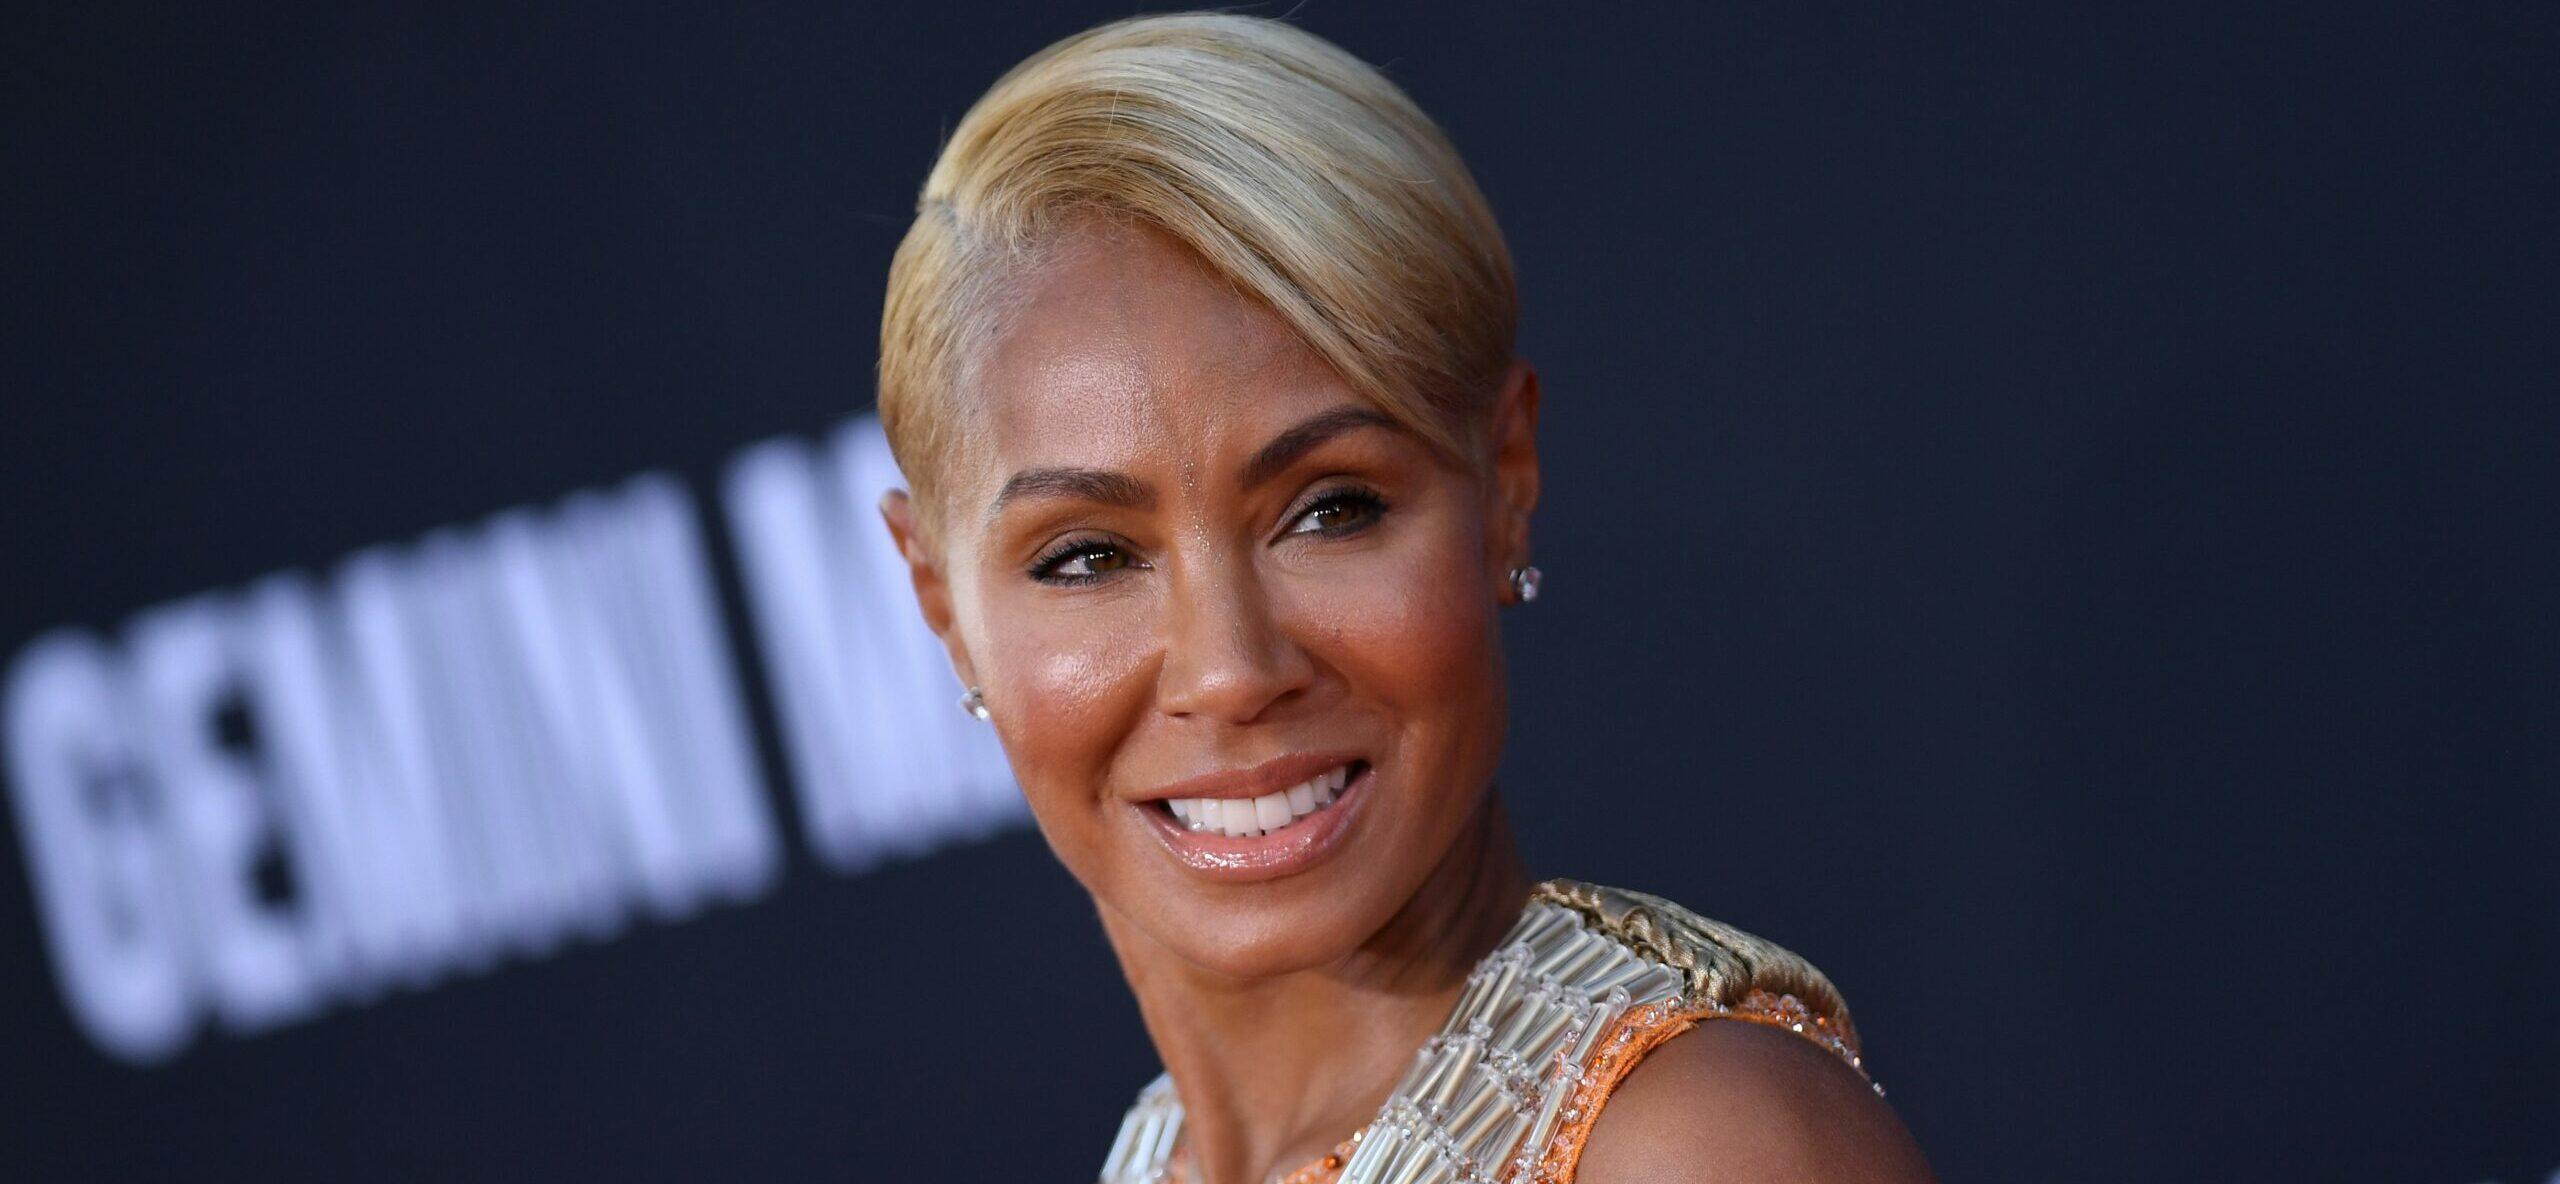 A photo showing Jada Pinkett Smith at an event.